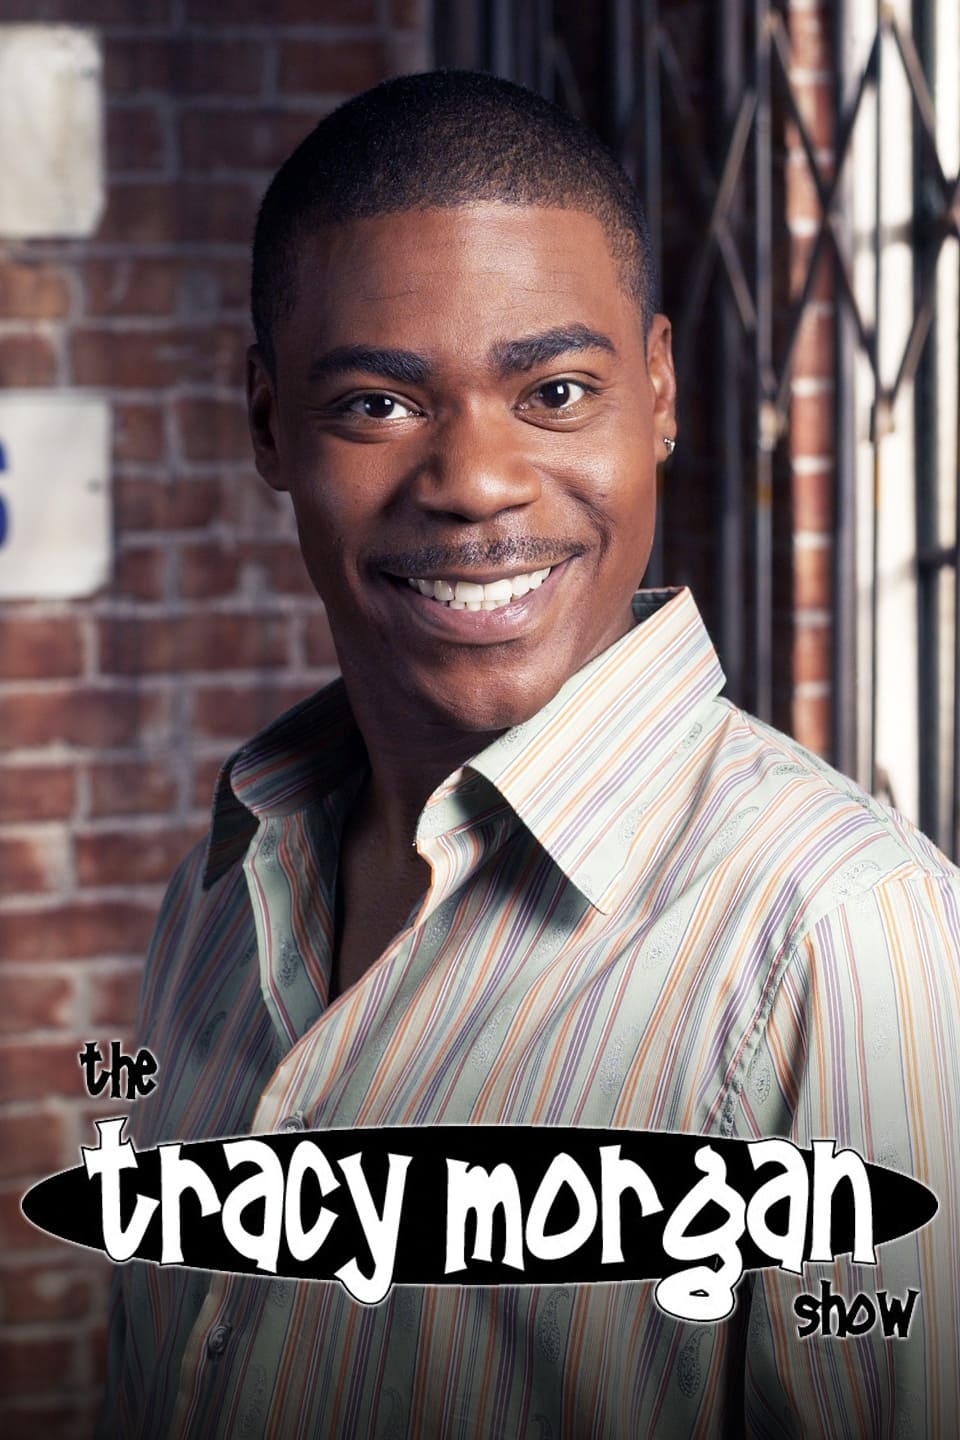 The Tracy Morgan Show (2003)